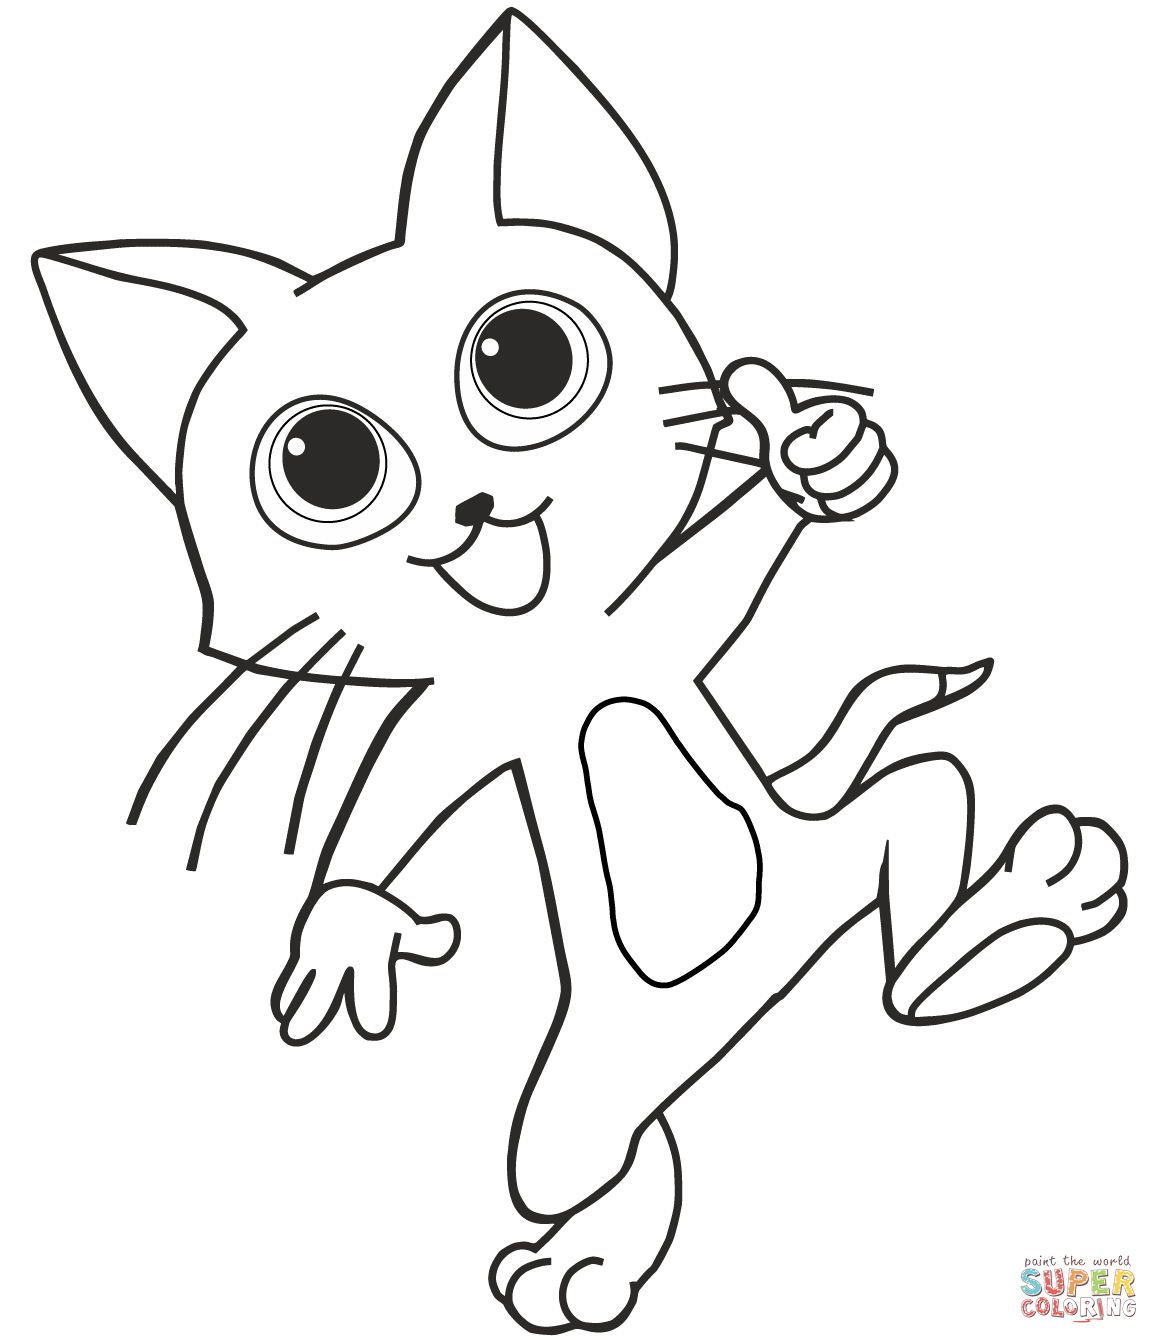 Funny cat coloring page free printable coloring pages